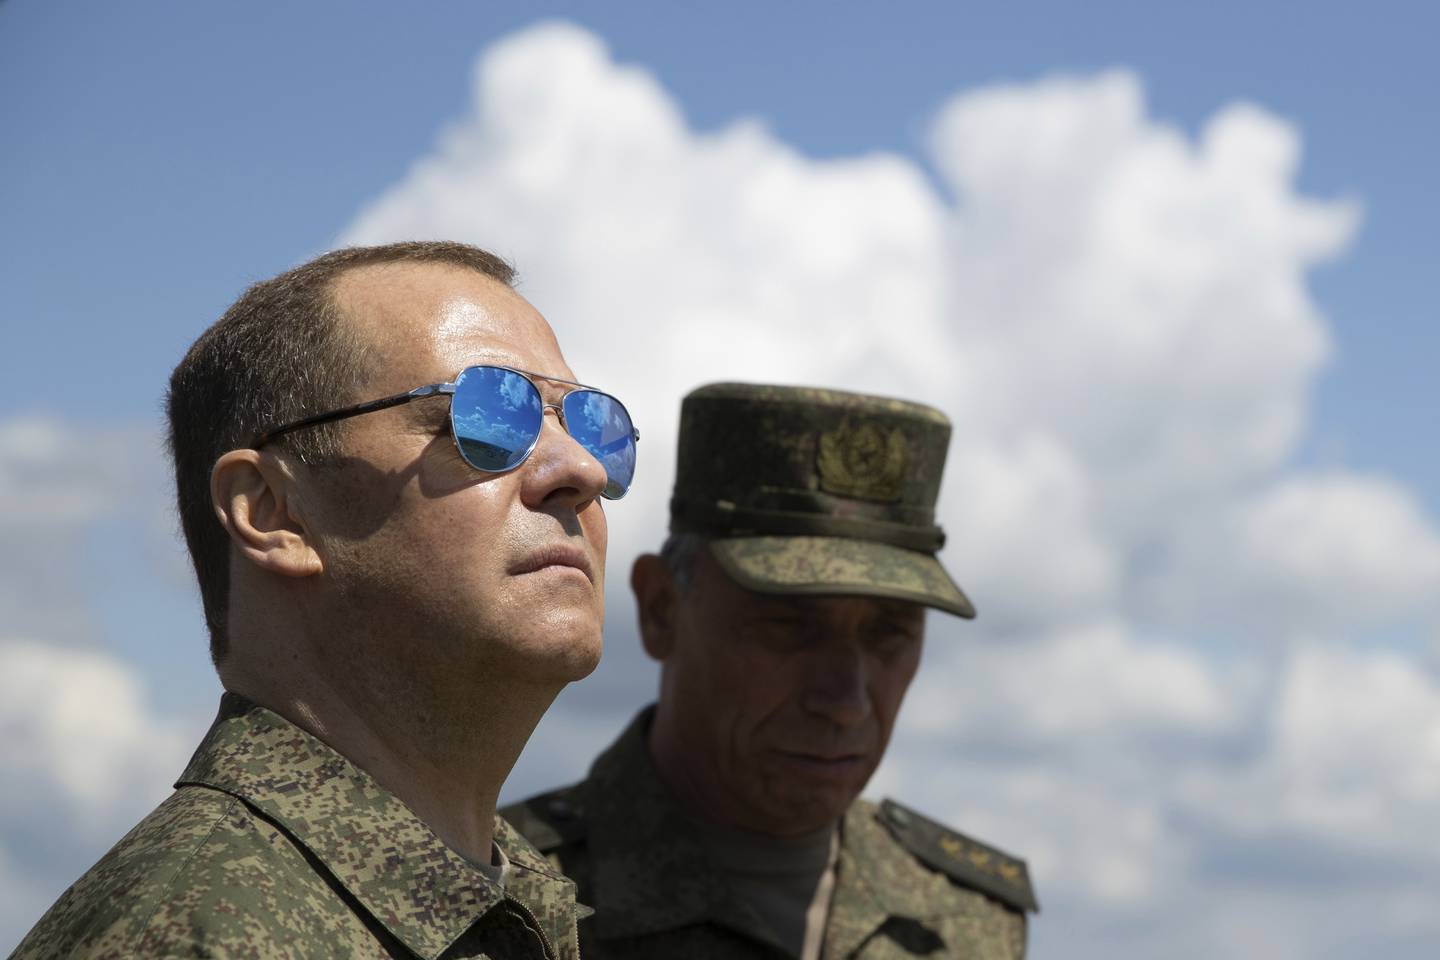 FILE - Russian Security Council Deputy Chairman and the head of the United Russia party Dmitry Medvedev, left, visits the Totsky military training ground in the Orenburg region, Russia, July 14, 2023. Medvedev, the deputy head of Russia's Security Council who served as a placeholder president in 2008-12 because Putin was term-limited, has unleashed near-daily threats that Moscow won't hesitate to use nuclear weapons. (Ekaterina Shtukina, Sputnik, Pool Photo via AP, File)